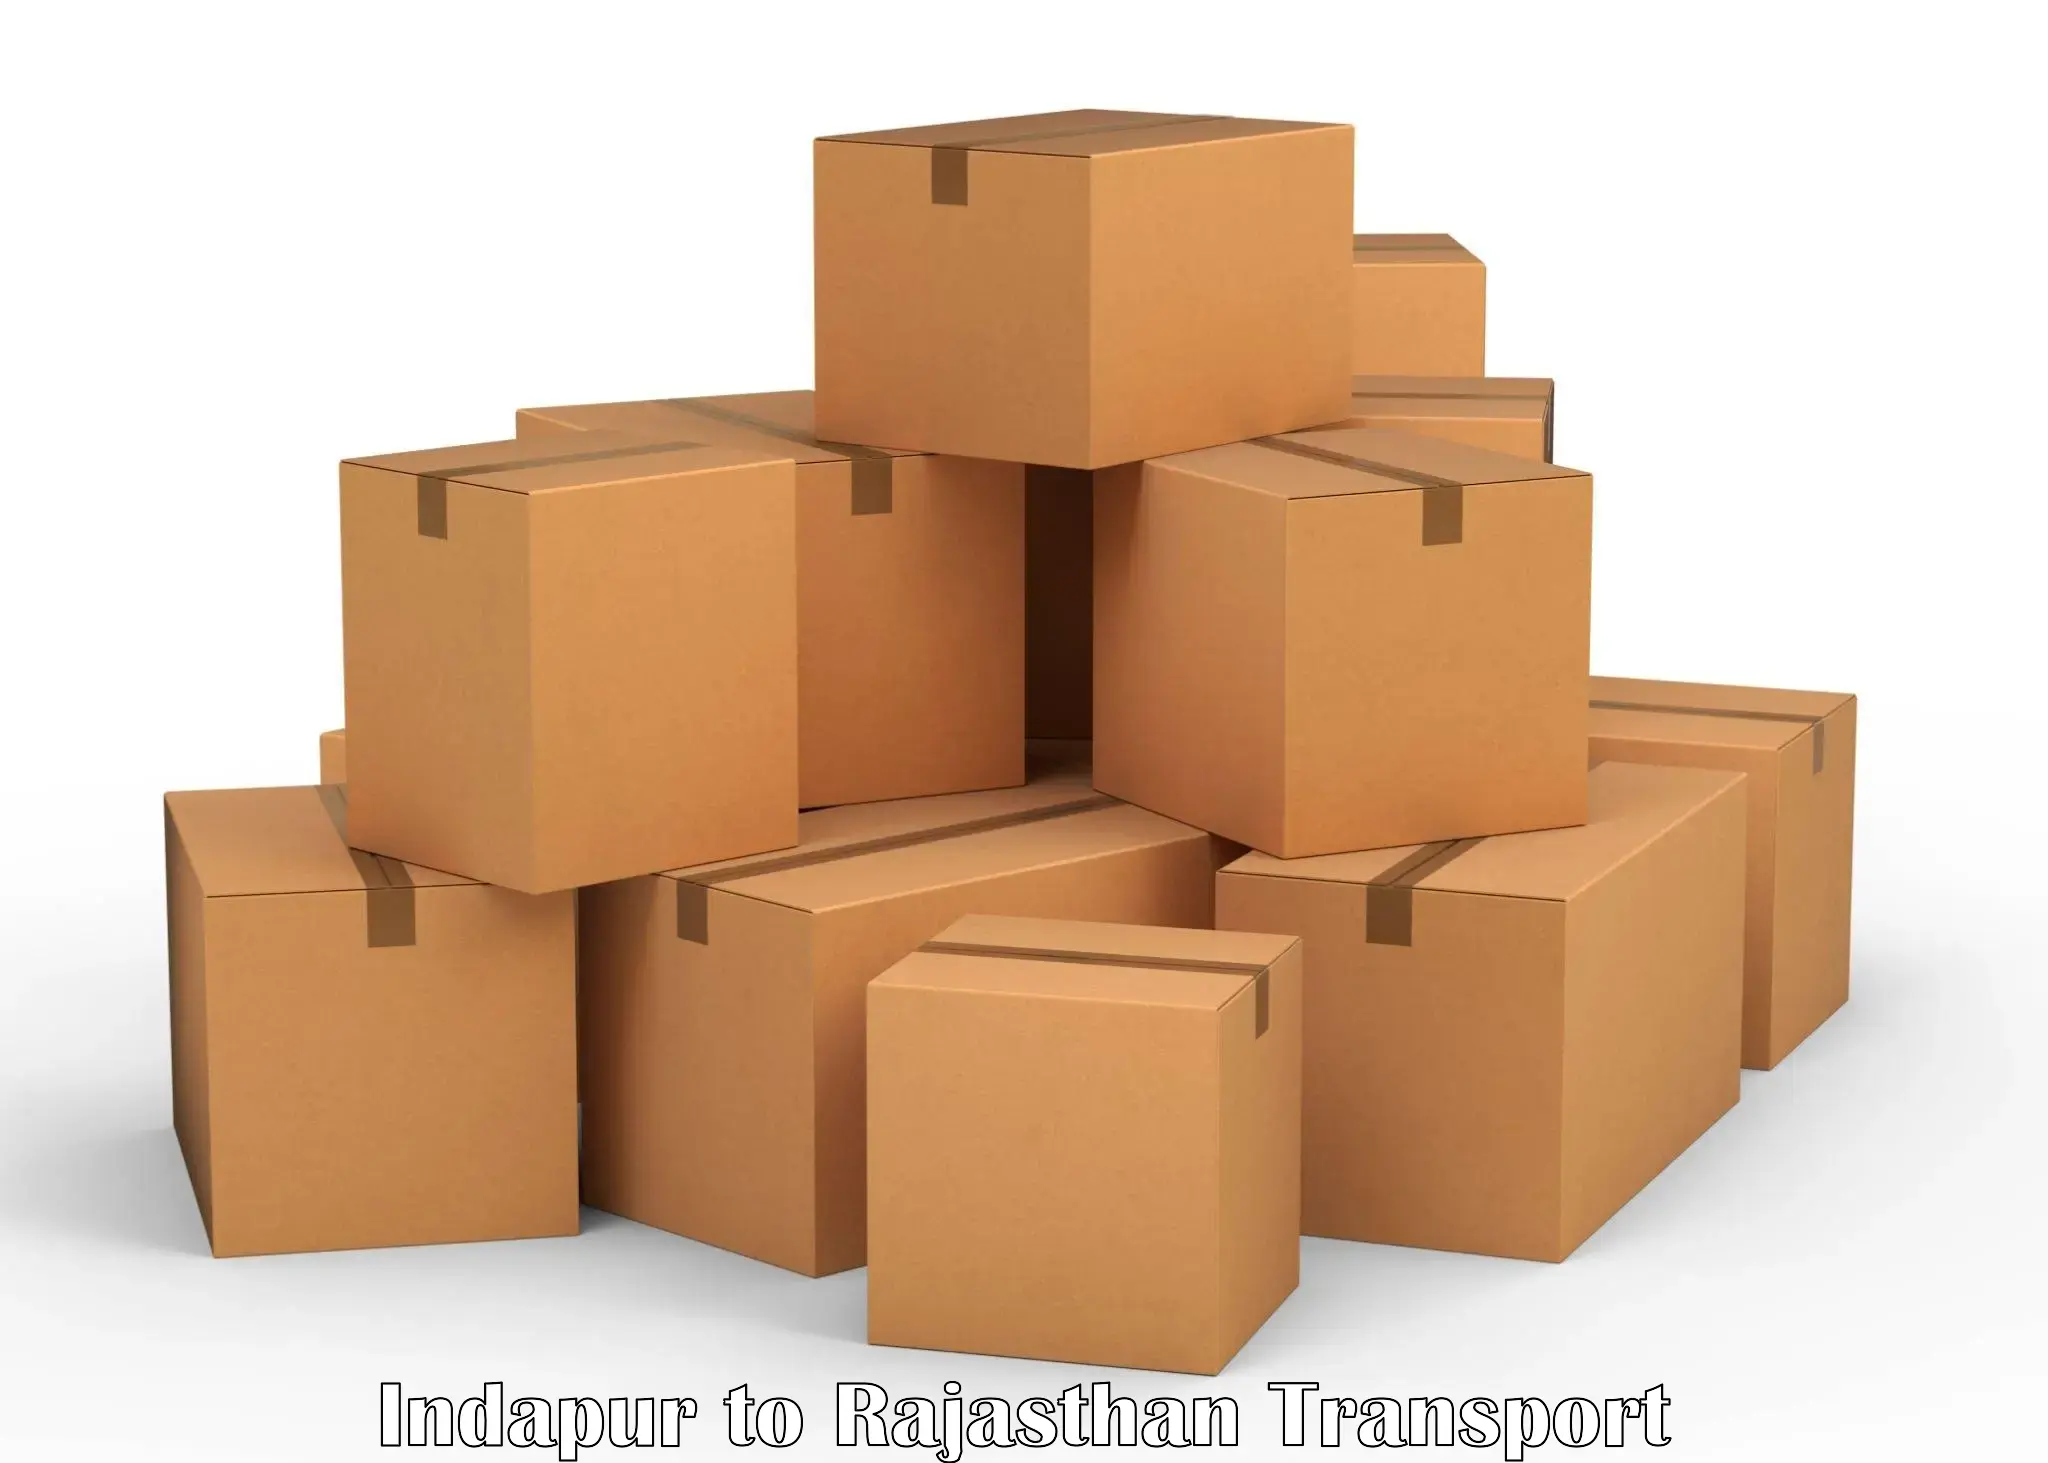 Parcel transport services in Indapur to Yathalakunta